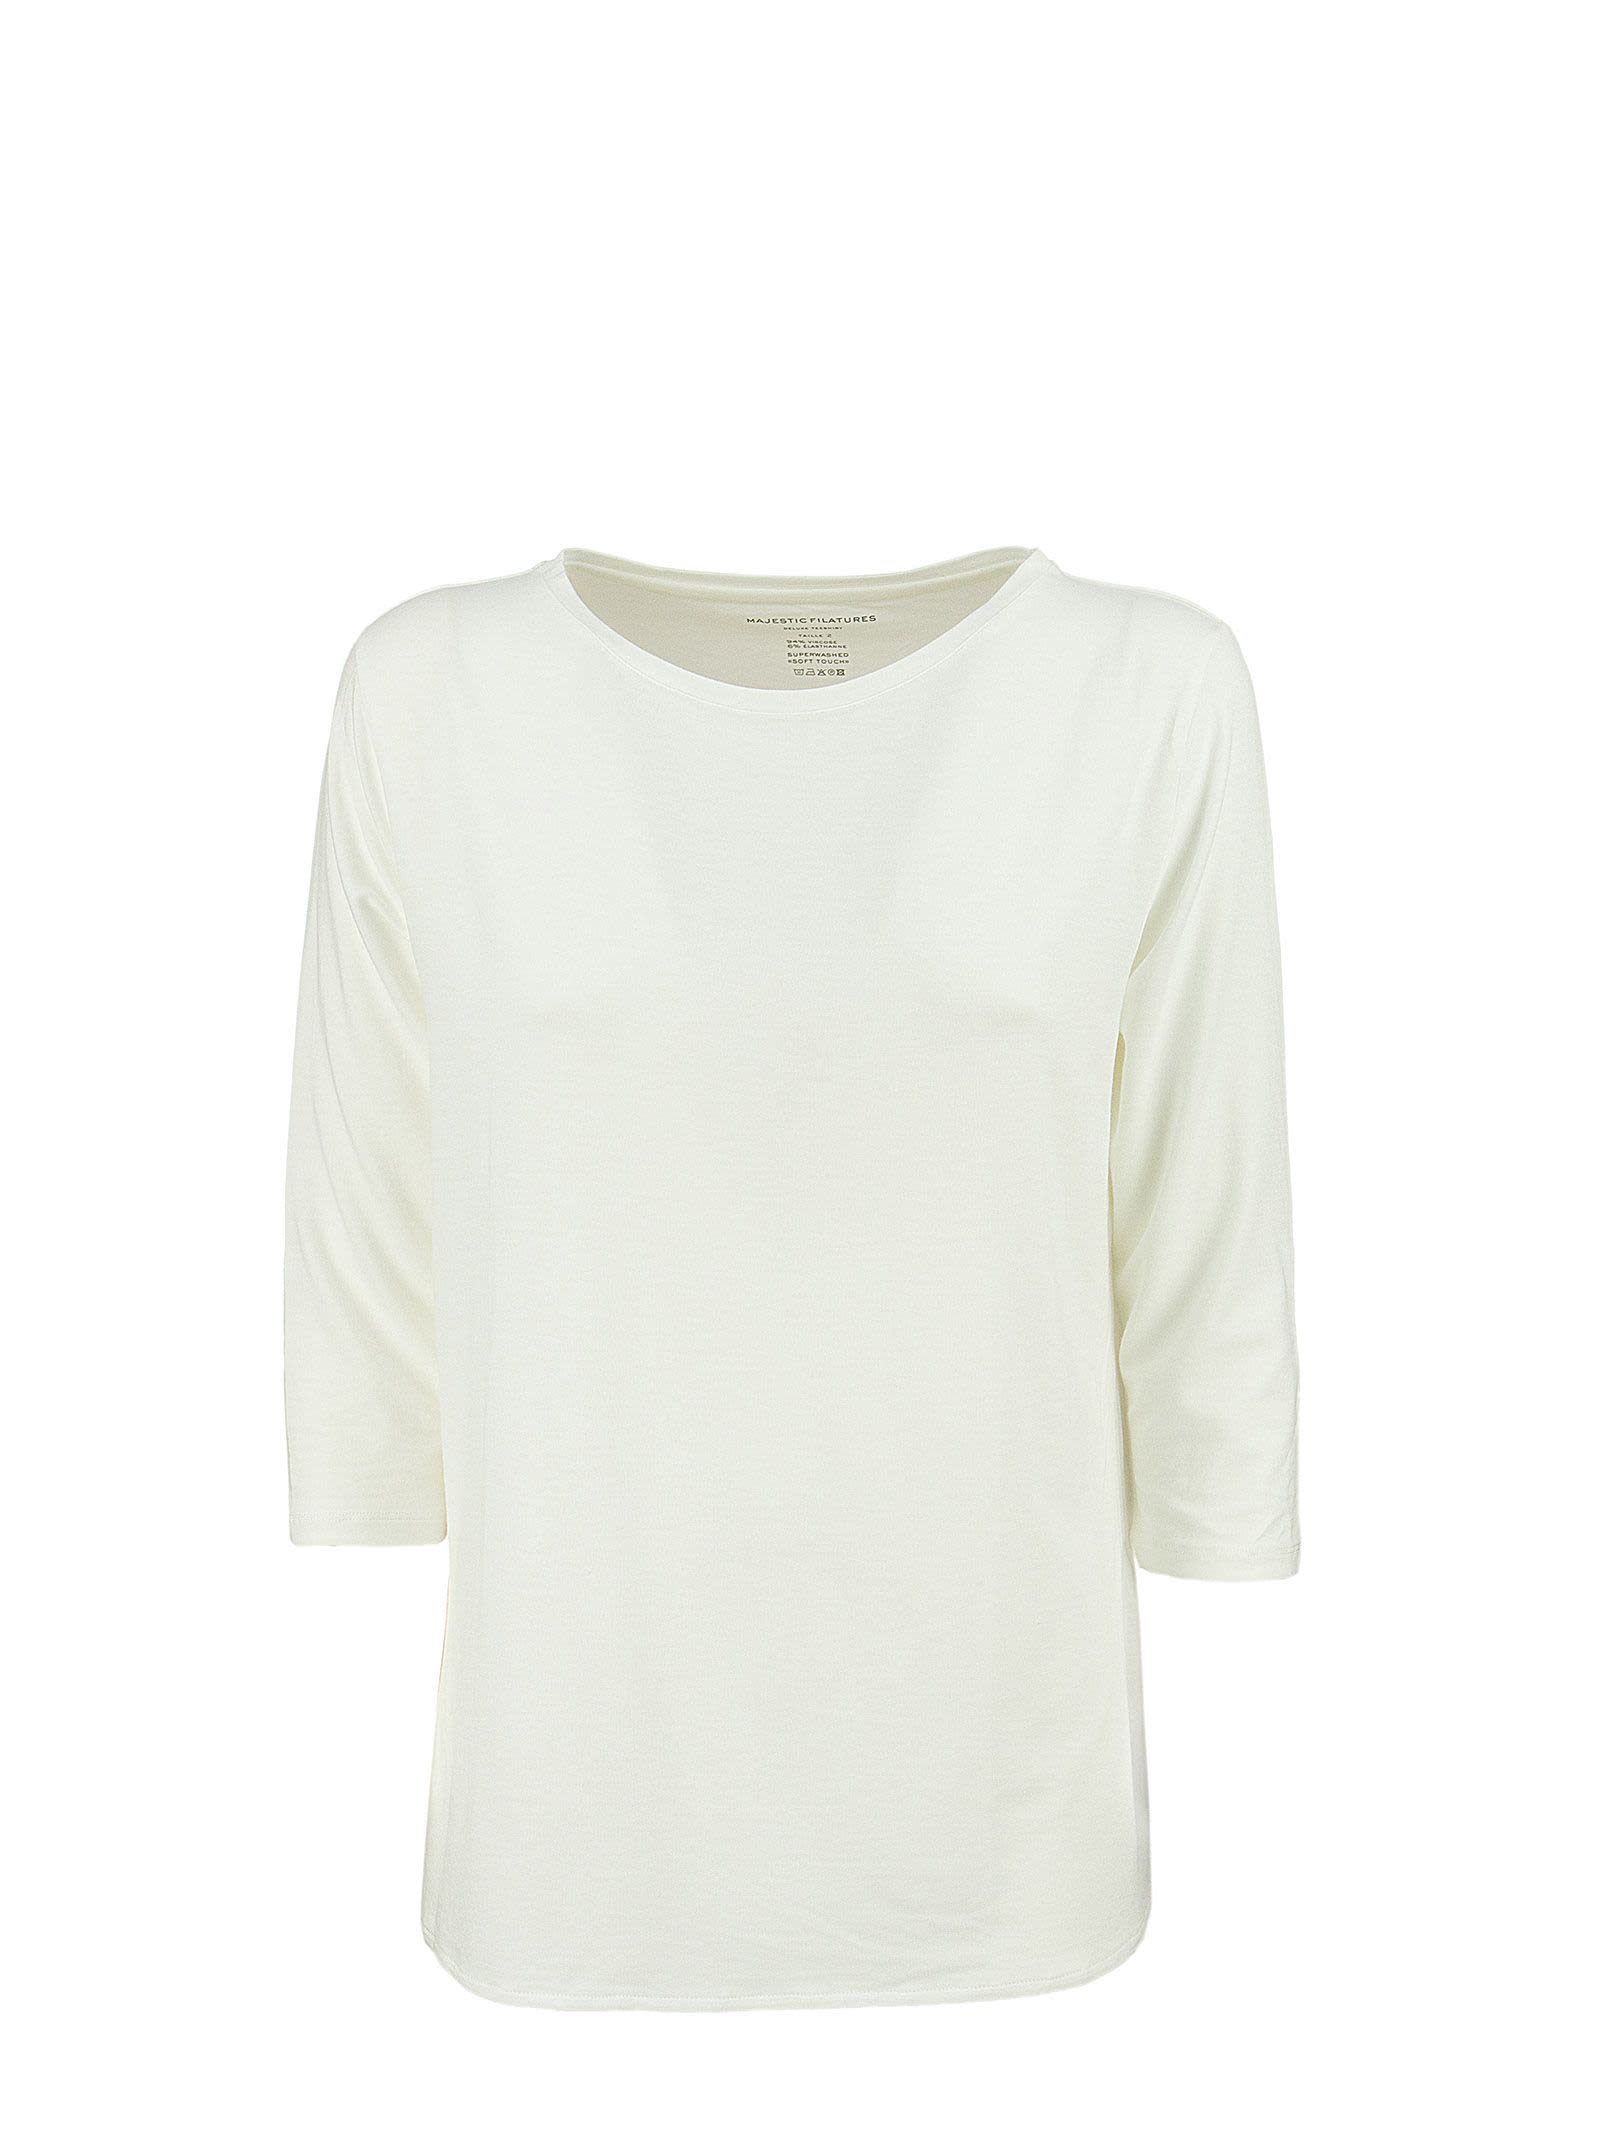 Majestic Filatures T-shirt With Boat Neckline And 3/4 Sleeves